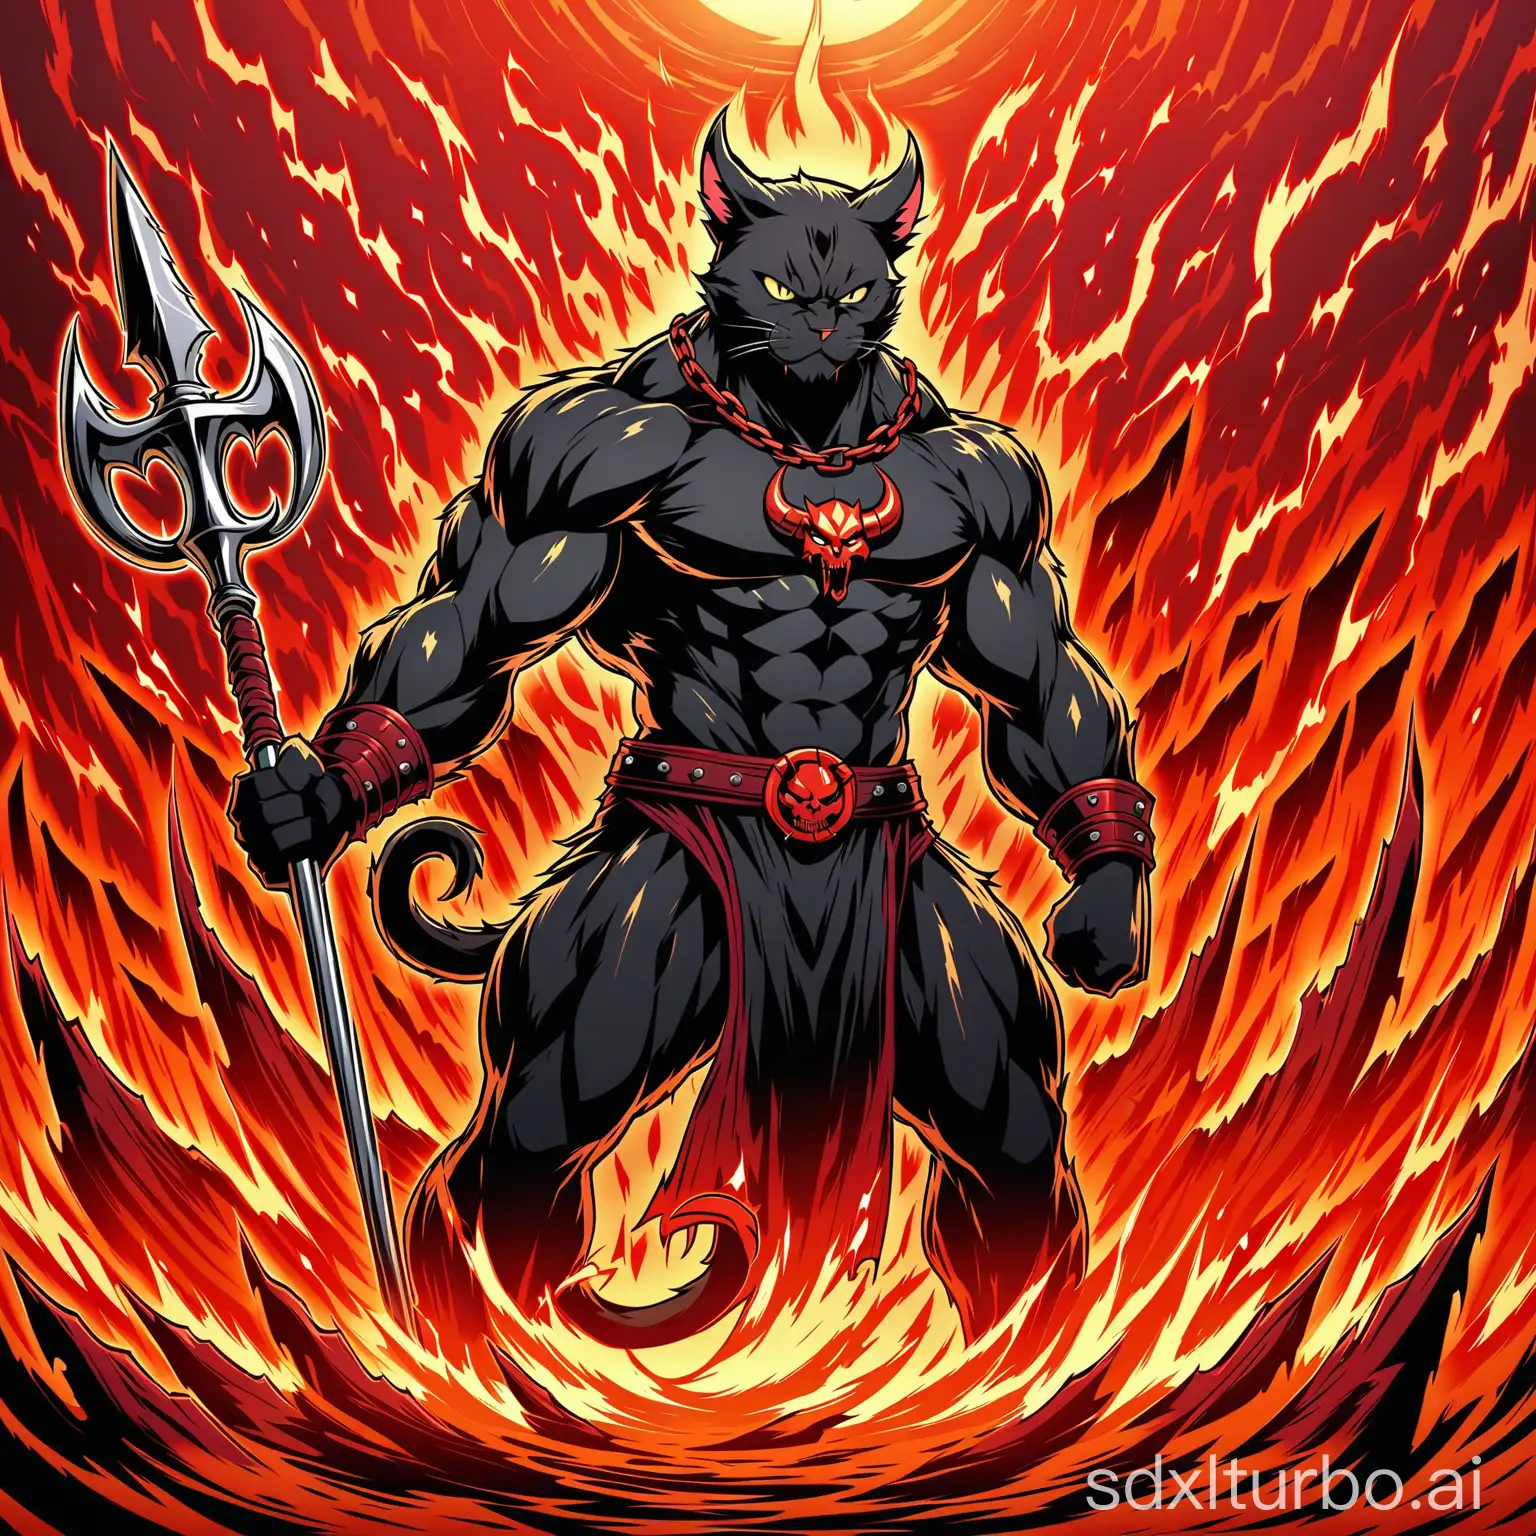 generate a black male muscular cat with red devil horns and demonically glaring eyes. It also has a trident in its hand. The background should remind of hell.